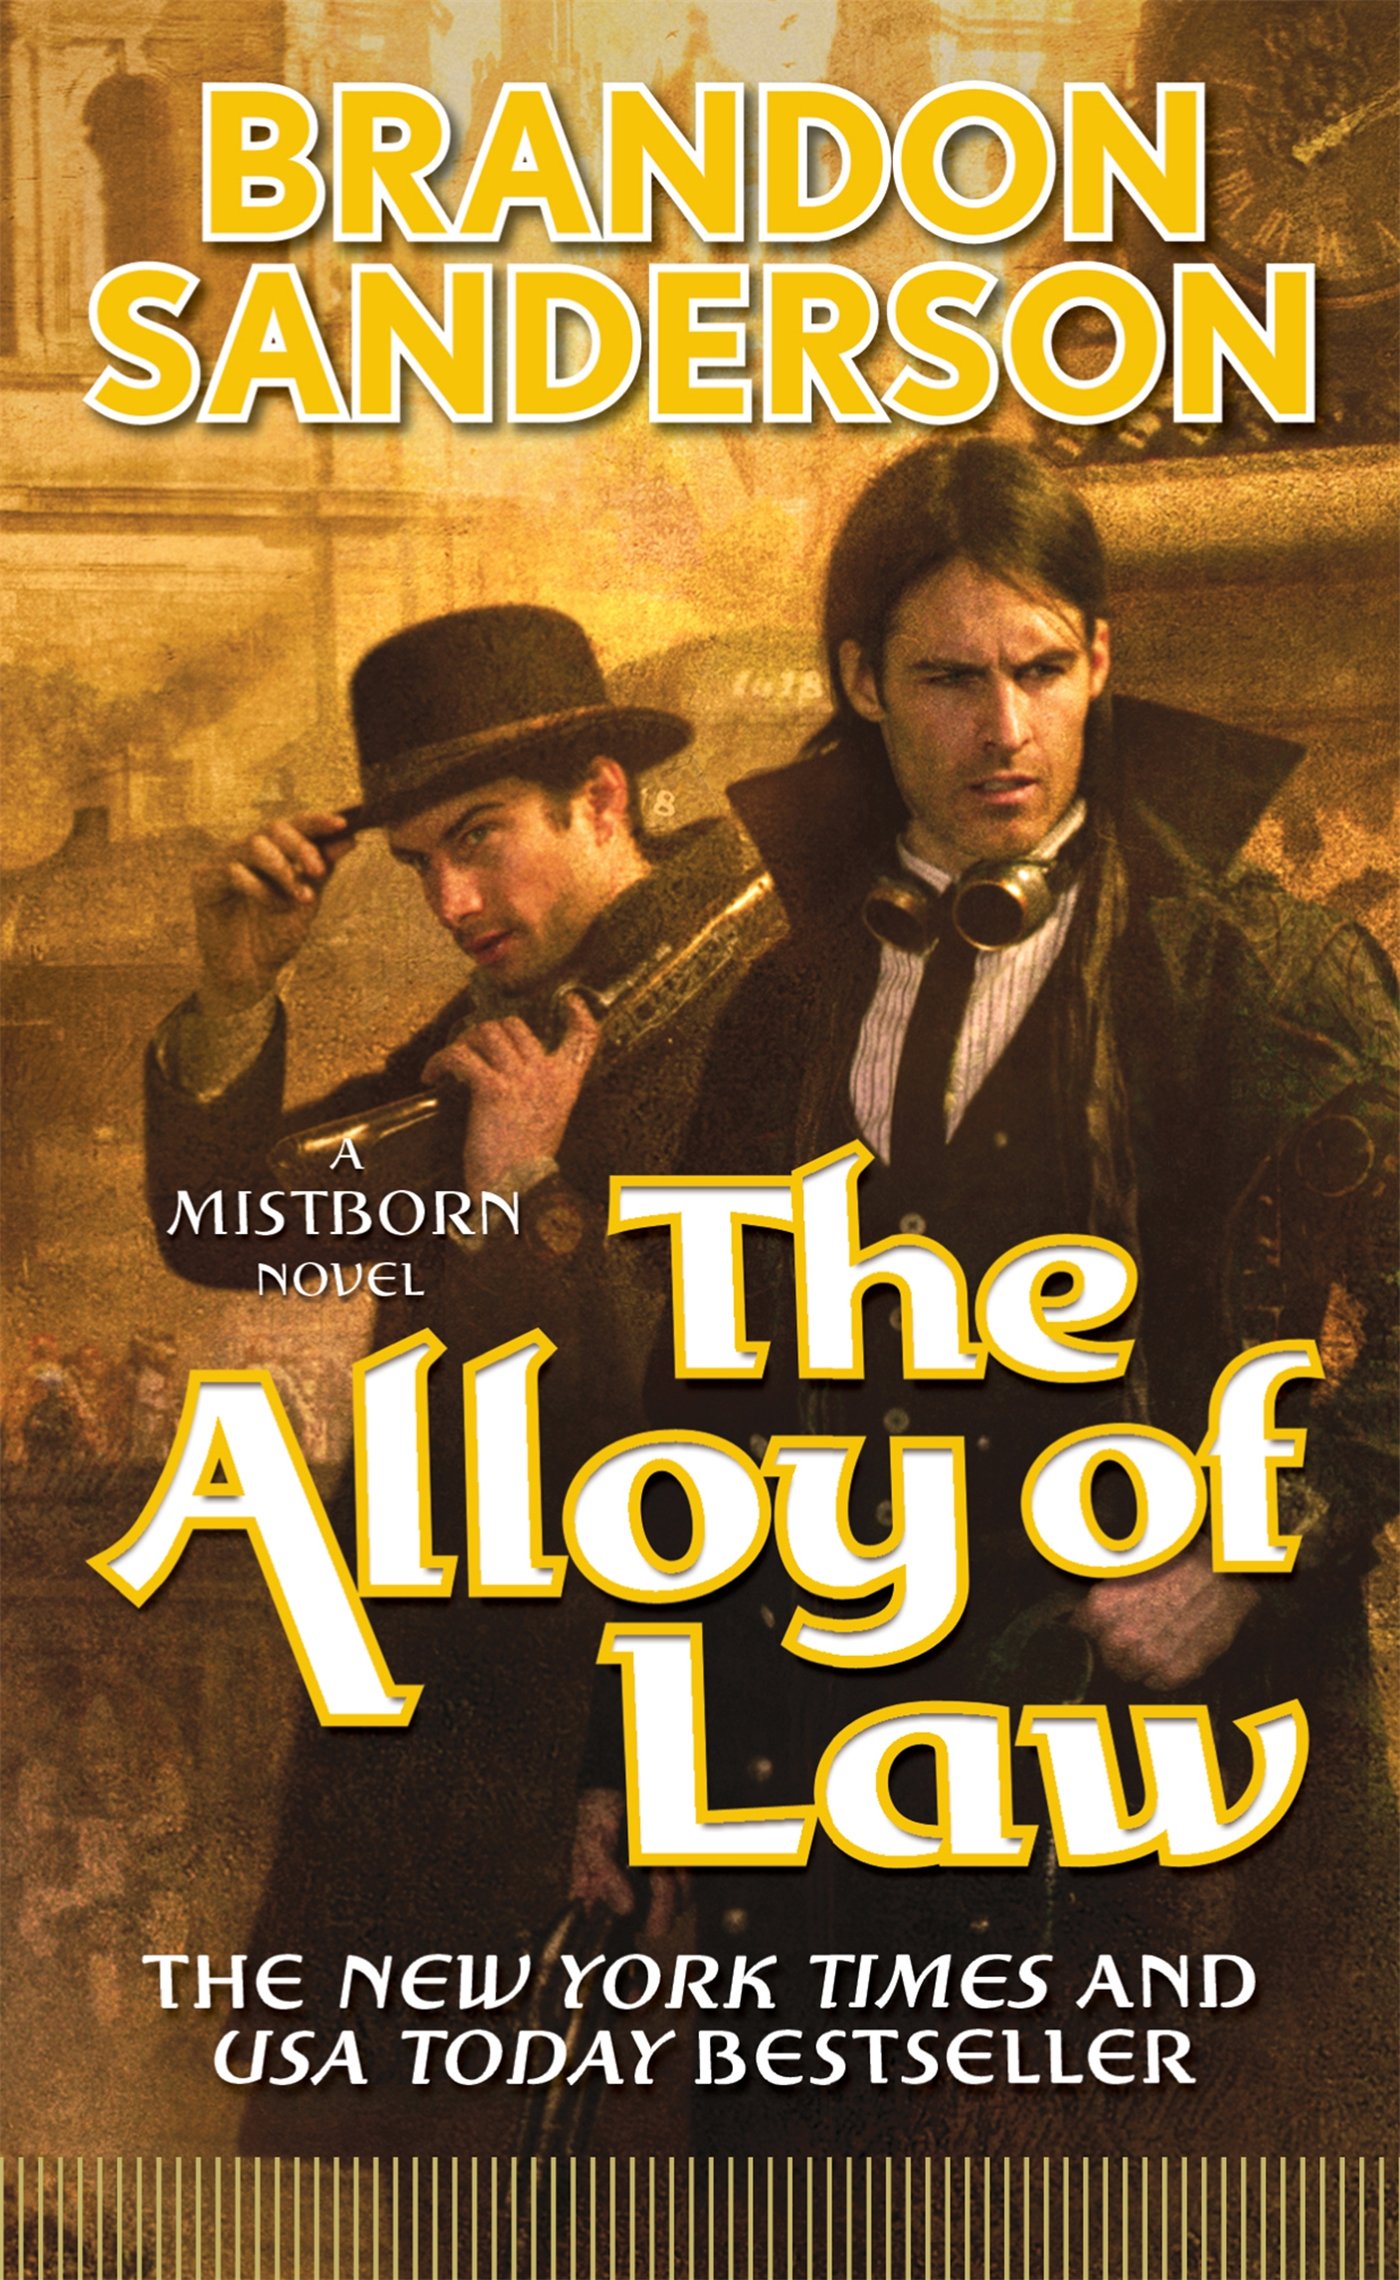 Mistborn: The Alloy of Law